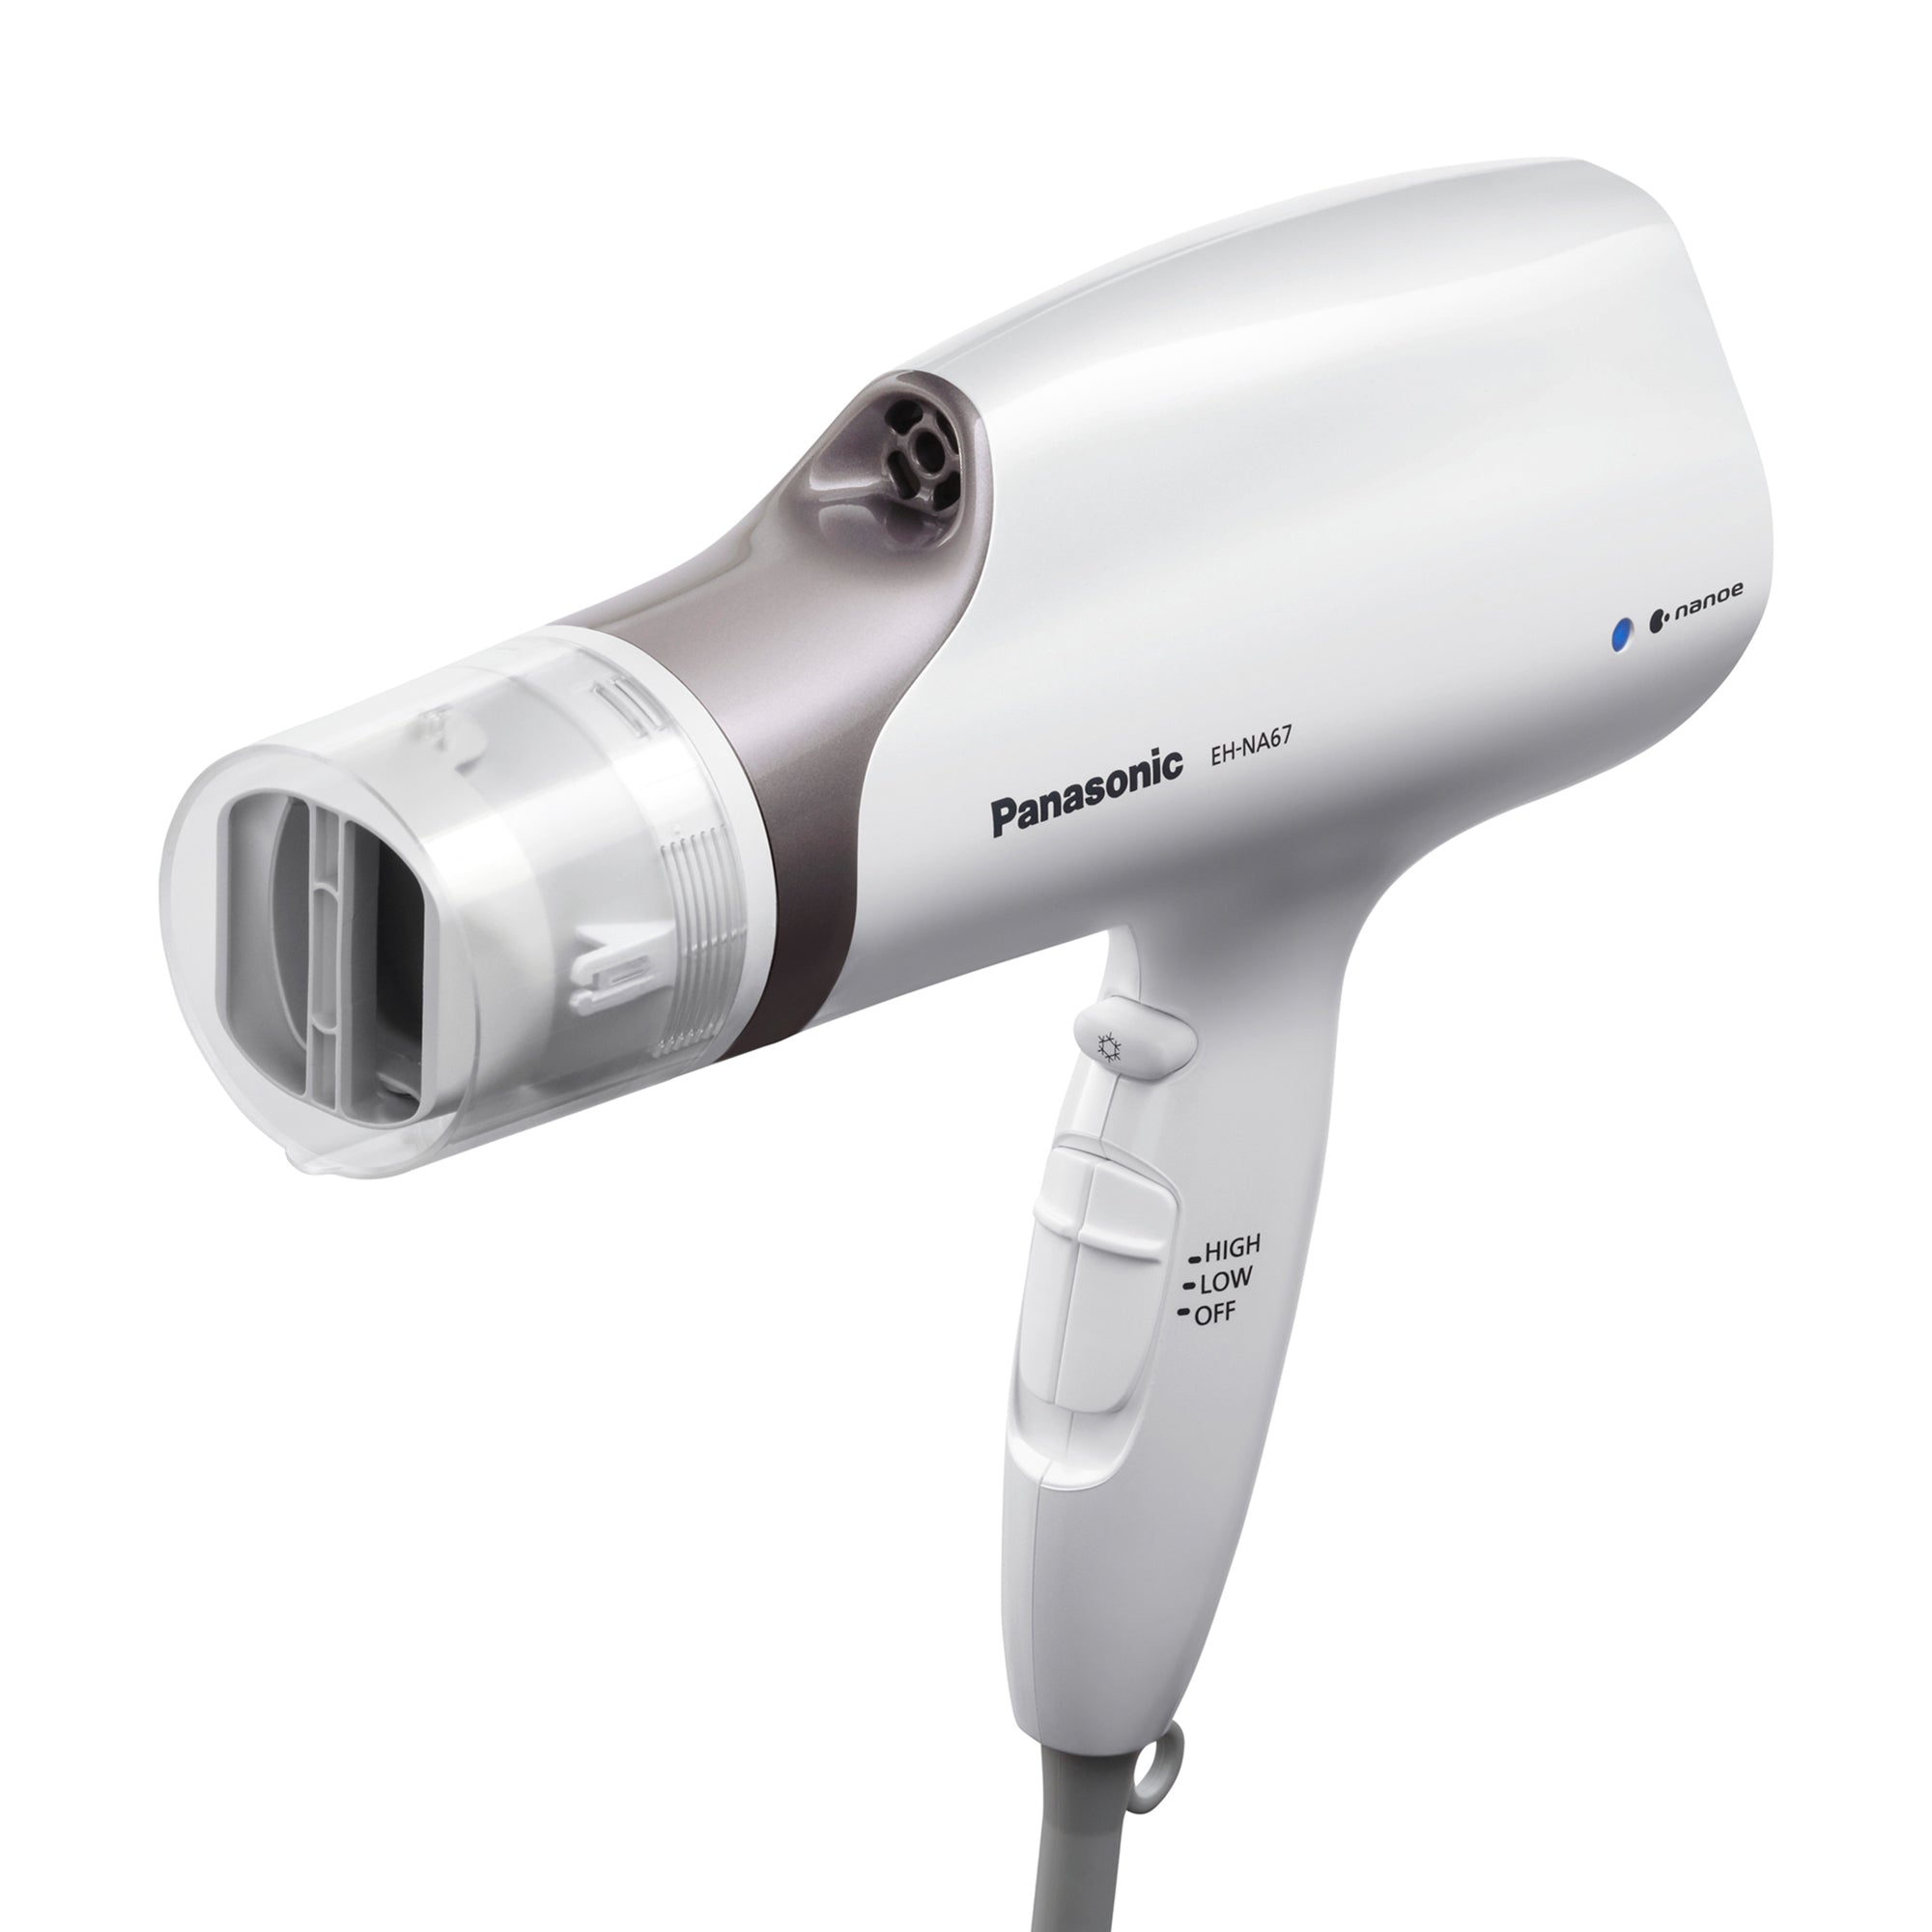 3 Attachments Quick-Dry Hair Dryer Oscillating Styling nanoe™ Nozzle including Panasonic with